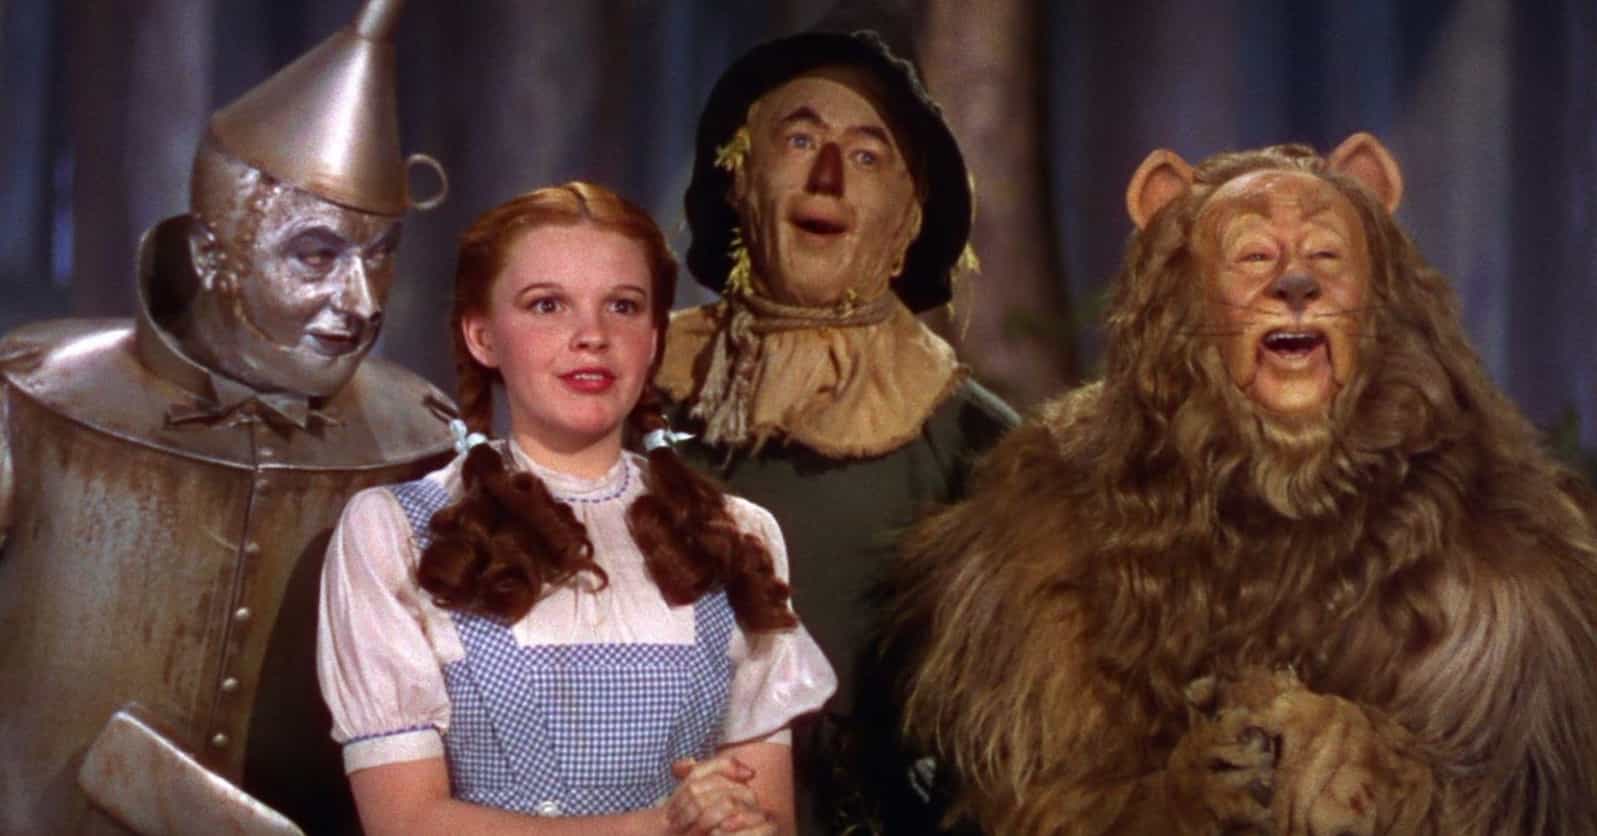 The 25 Best Movies Like 'The Wizard of Oz', Ranked By Fans